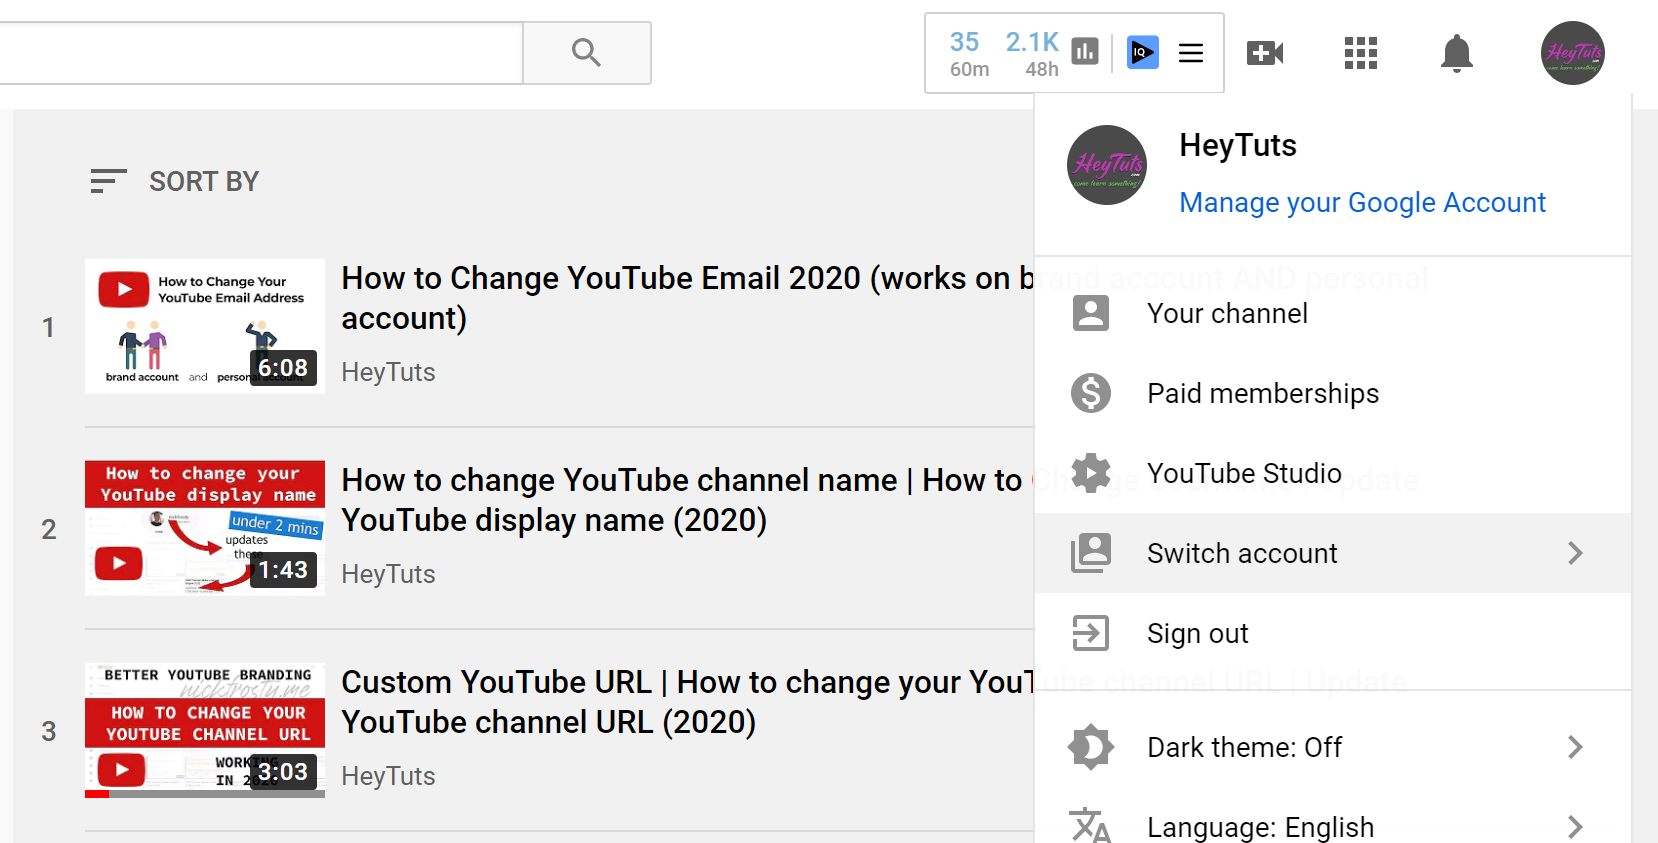 make sure your are selected to the correct YouTube account to change the email on